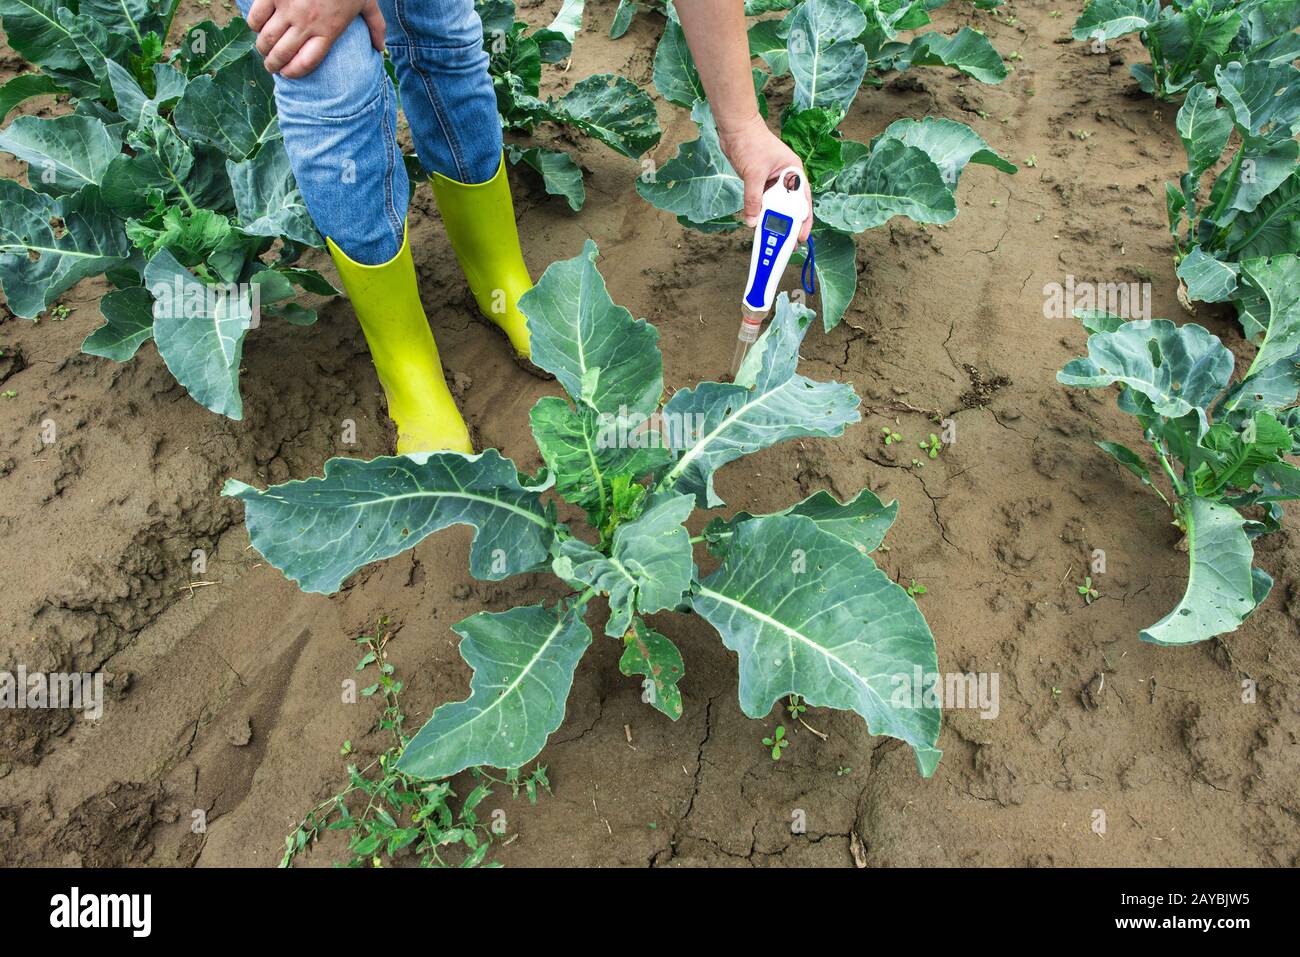 Woman use digital soil meter in the soil. Cabbage plants. Sunny day. Stock Photo